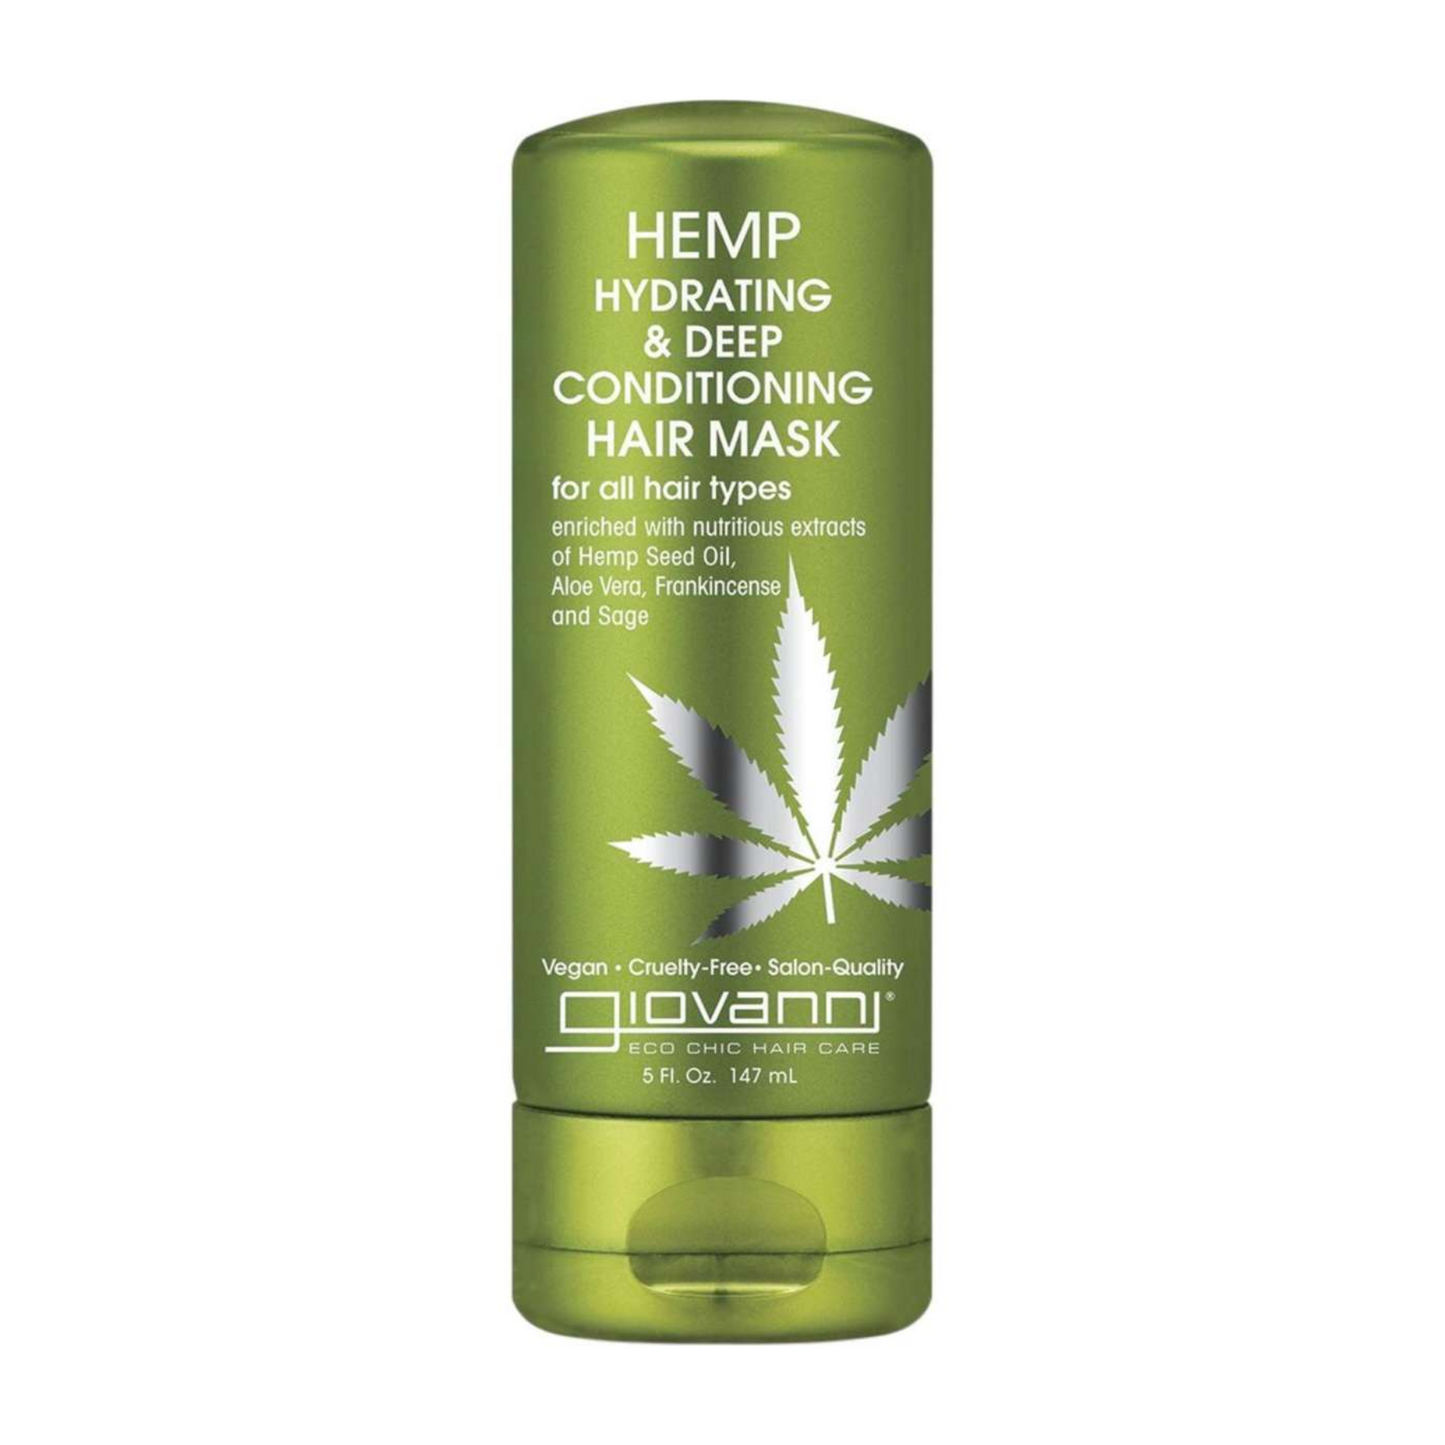 Giovanni Hemp Hydrating Deep Conditioning Hair Mask 147mL, For All Hair Types